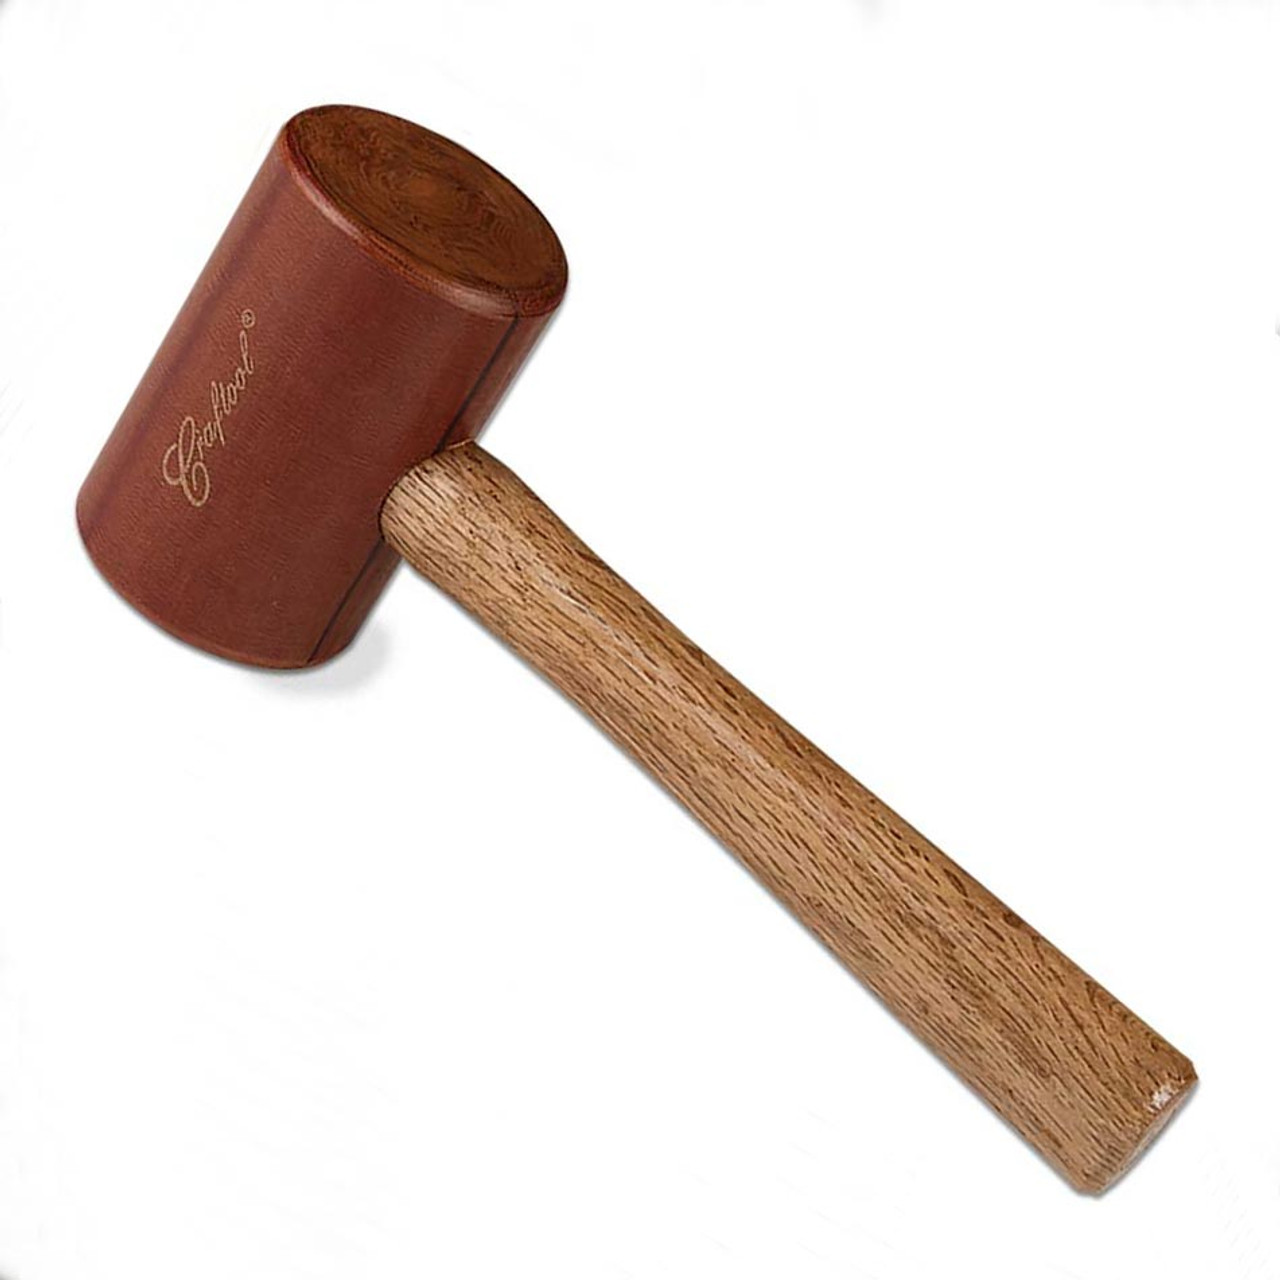 Supplies - Tools - Mallets / Hammers - Leathersmith Designs Inc.